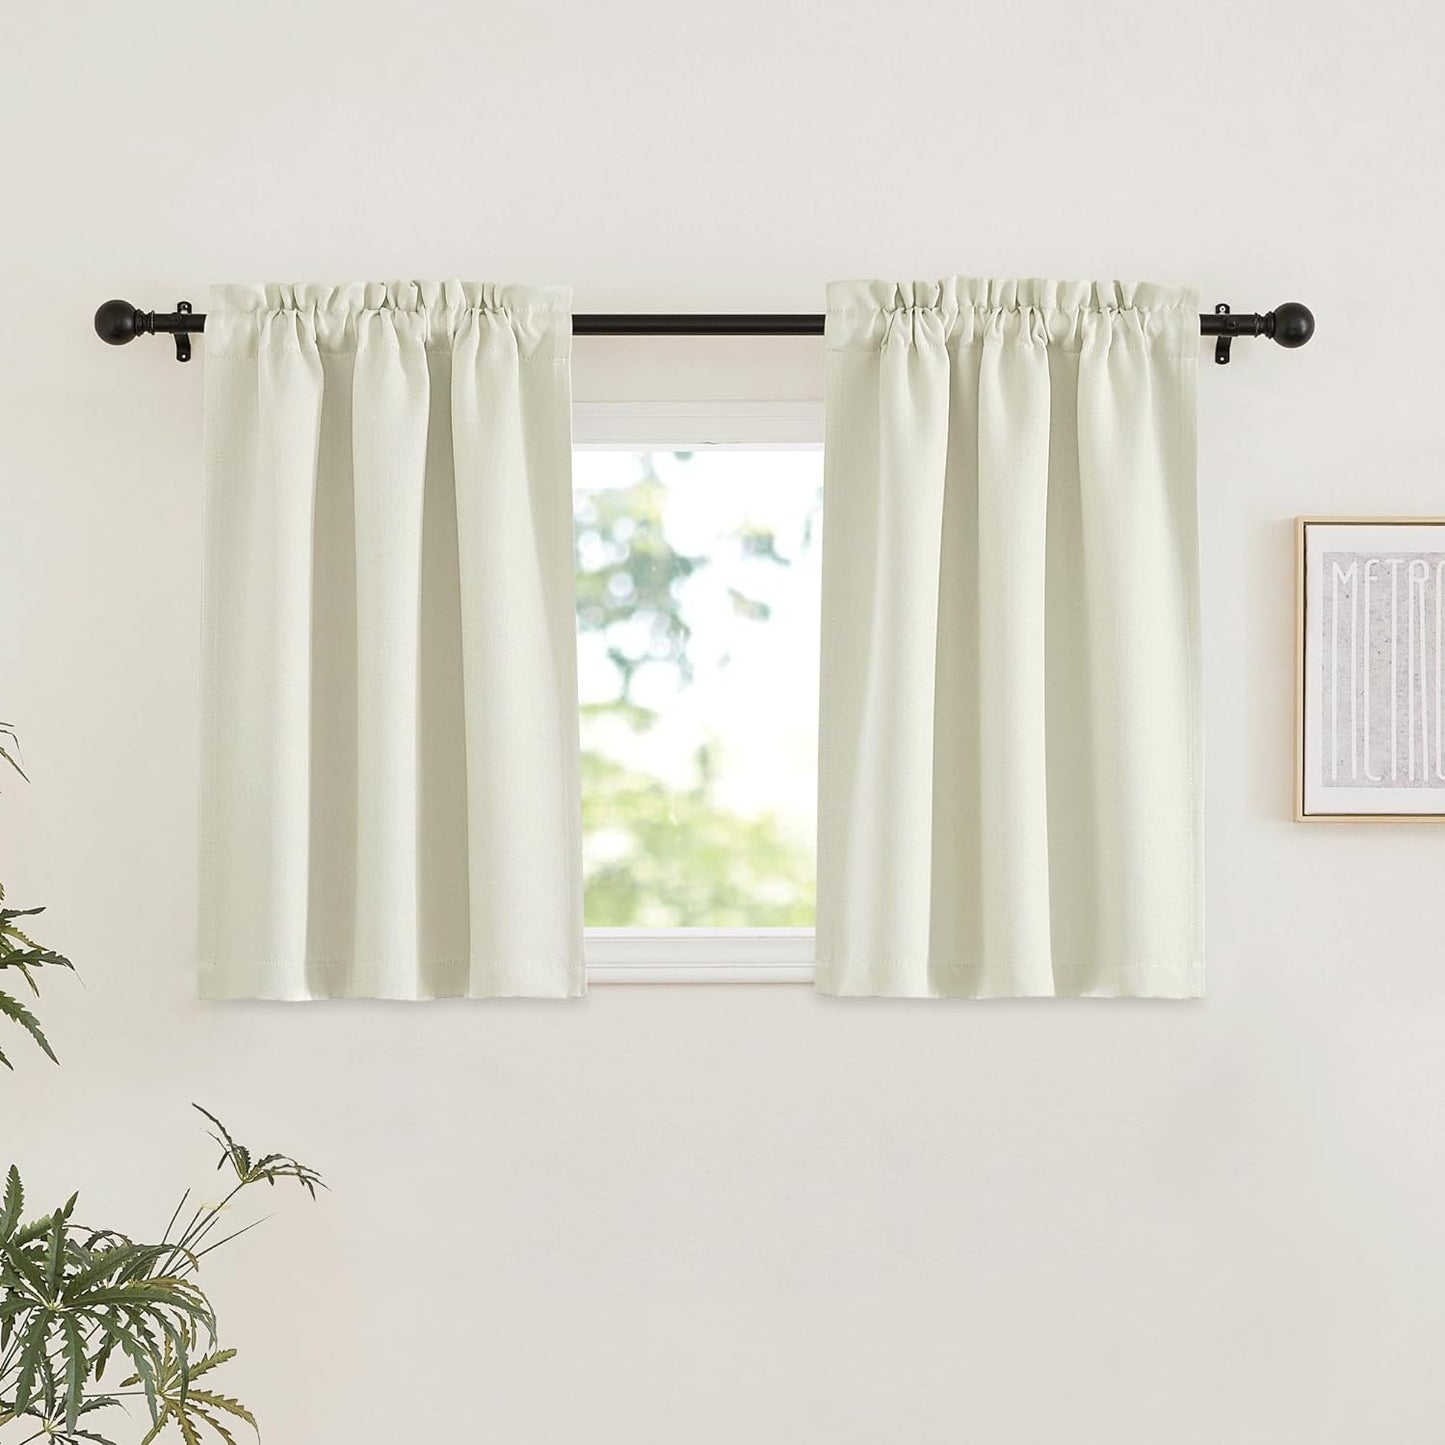 NICETOWN Faux Linen Room Darkening Curtains & Drapes for Living Room, Dual Rod Pockets & Hook Belt Heat/Light Blocking Window Treatments Thermal Drapes for Bedroom, Angora, W52 X L84, 2 Panels  NICETOWN Natural W34 X L36 